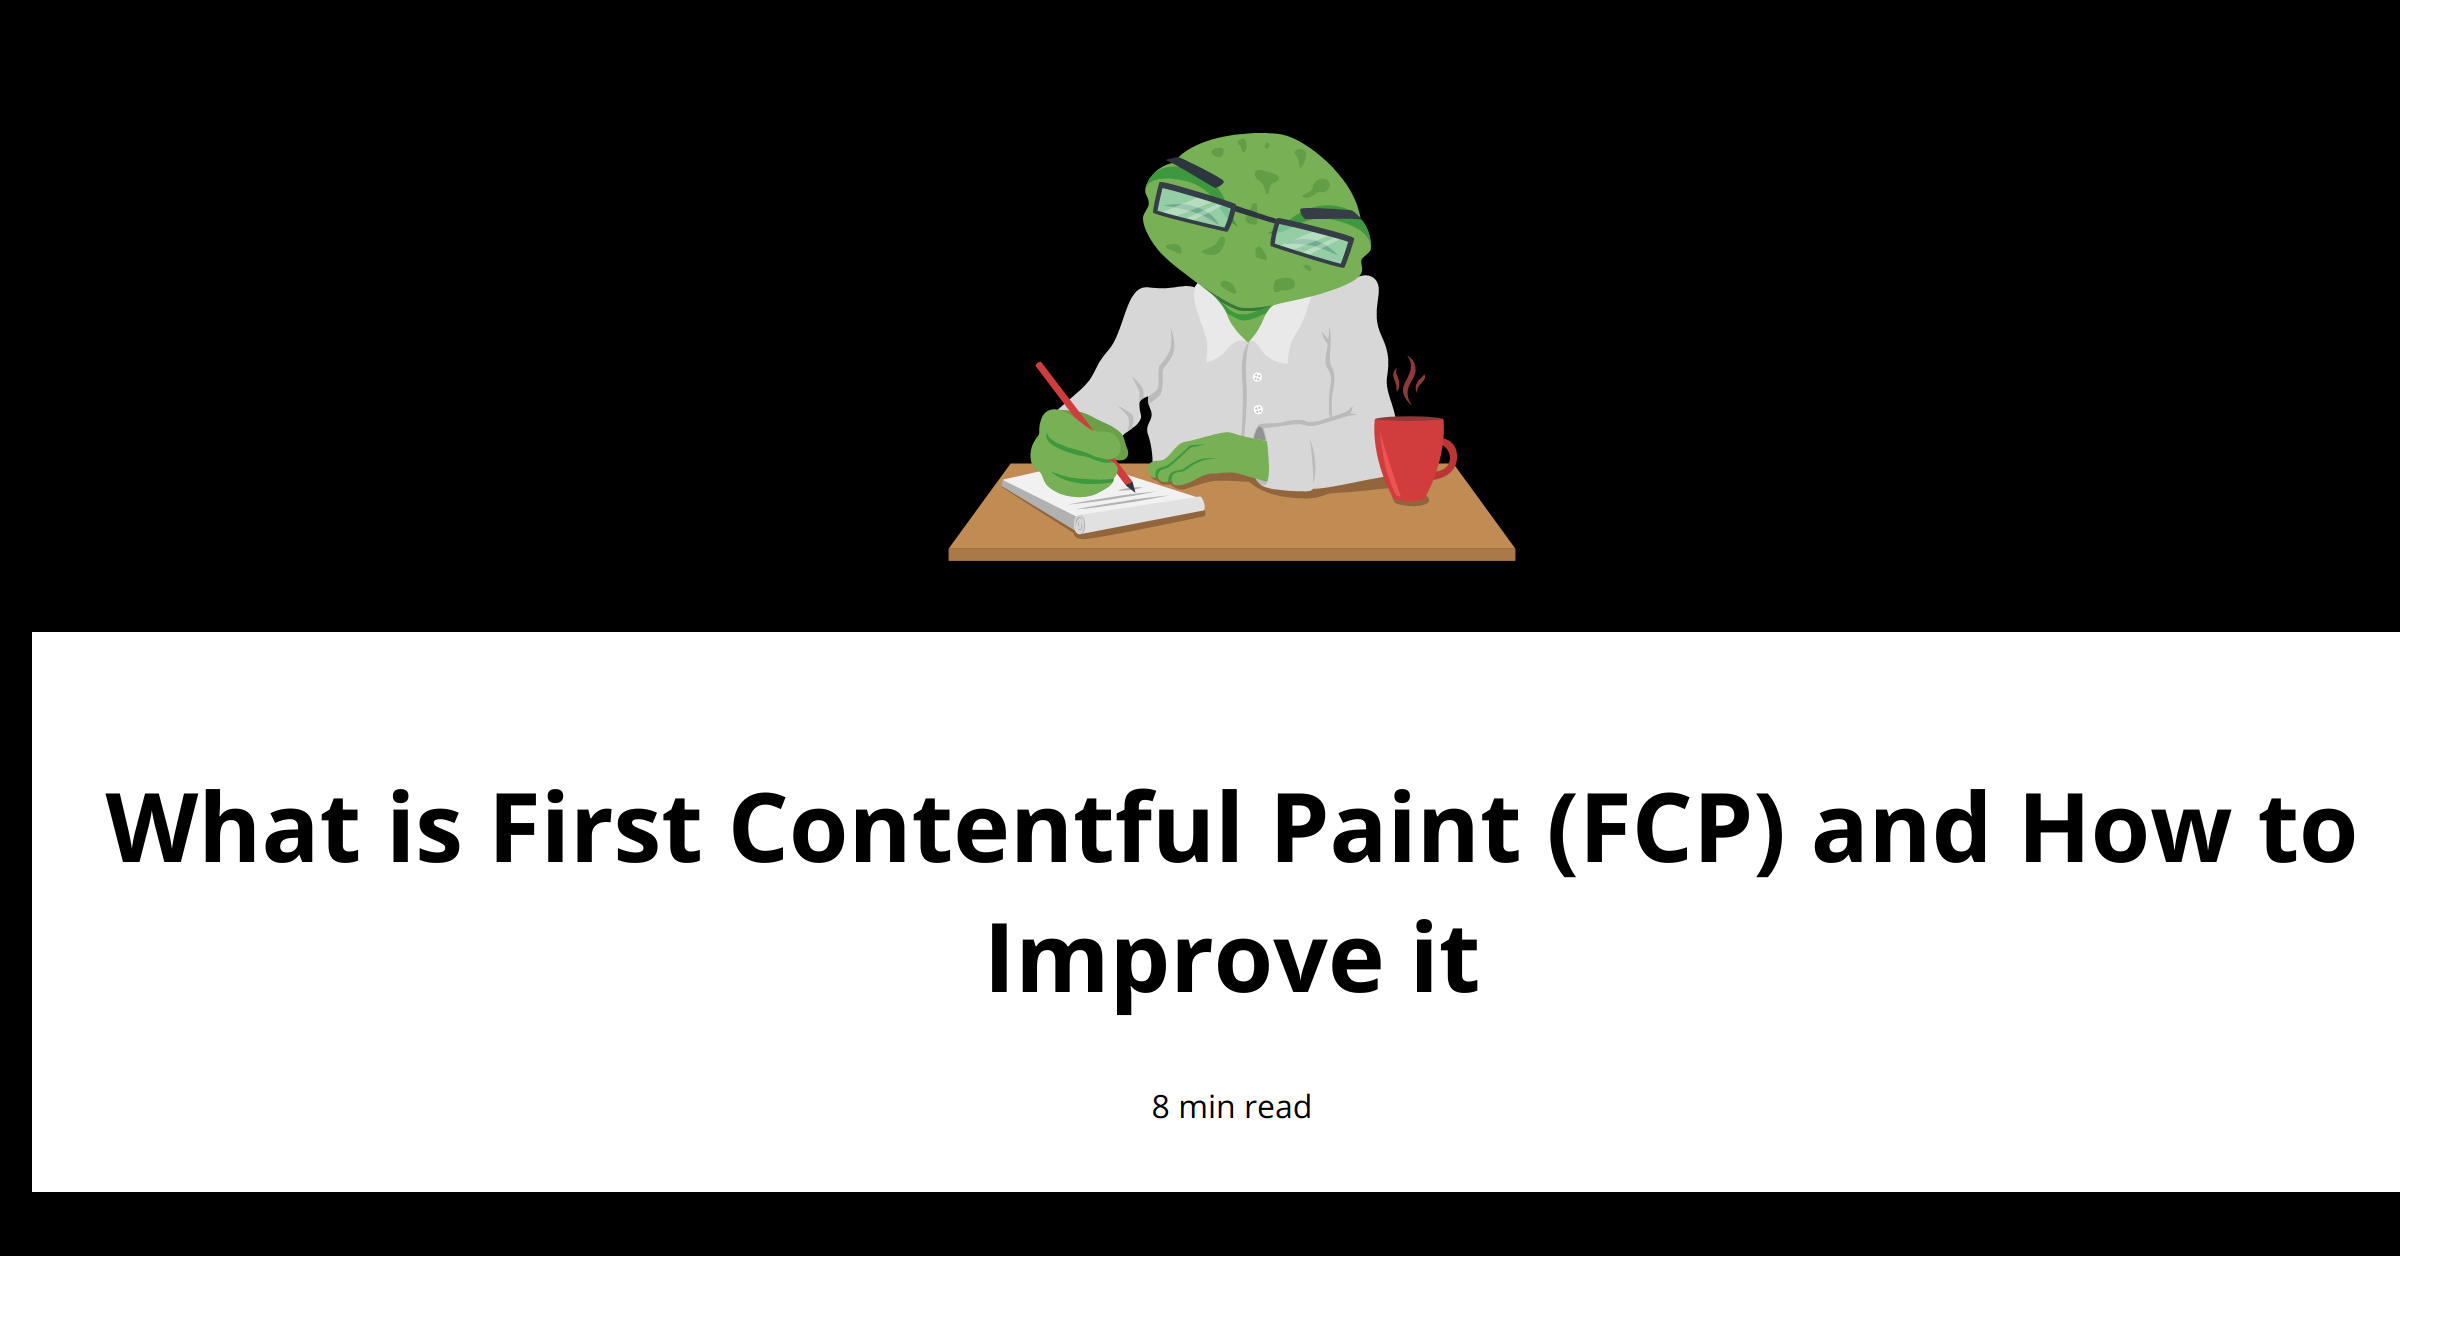 What is First Contentful Paint (FCP) and How to Improve it